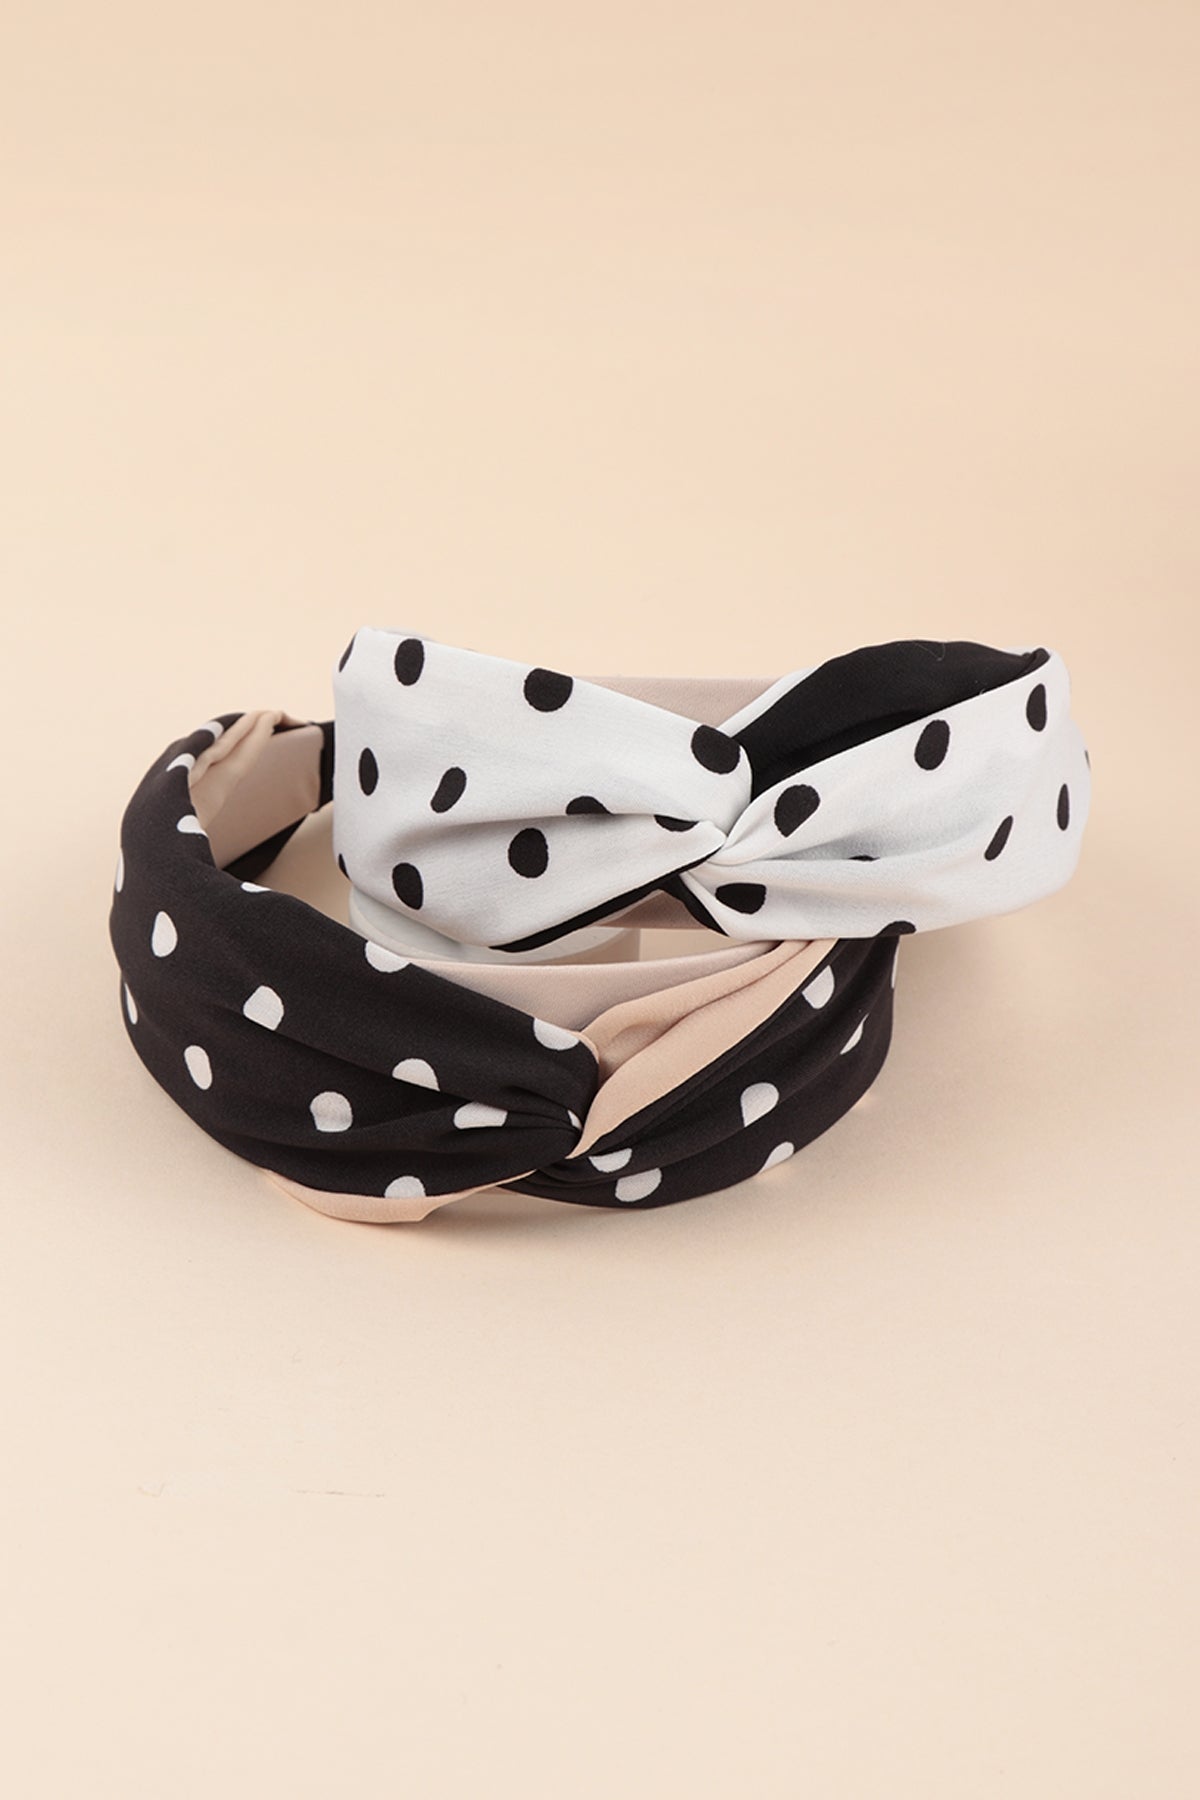 POLKA DOT PRINT TWISTED HEADBAND HAIR ACCESSORIES/6PCS (NOW $1.00 ONLY!)